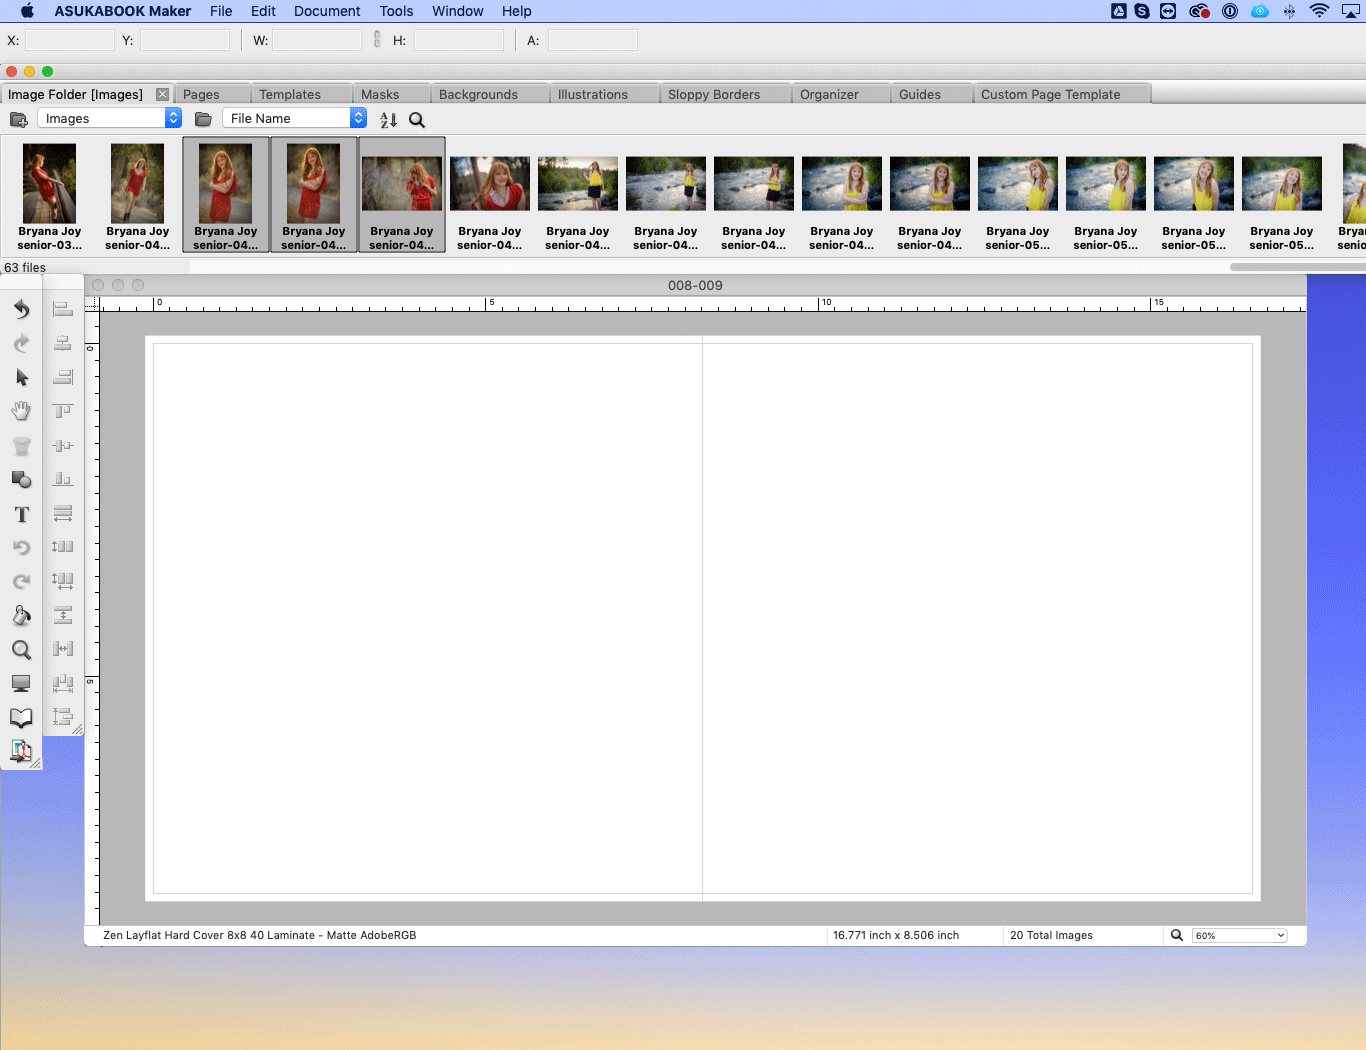 Filter Template by Number of Images